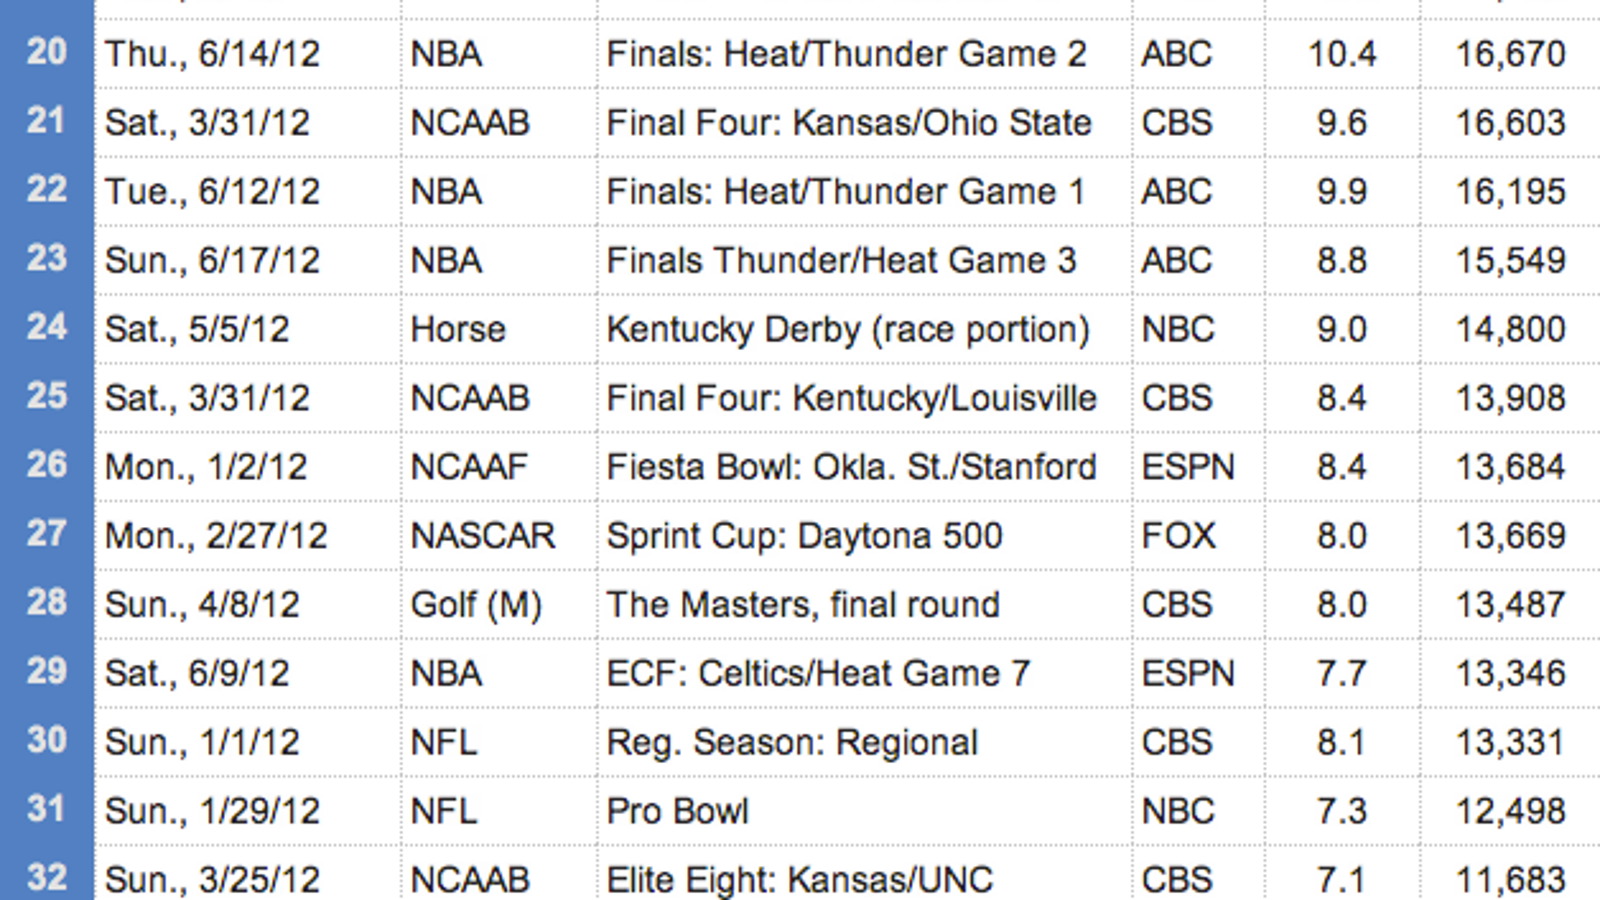 Here Are The 50 MostWatched Sporting Events Of 2012. Football Owns